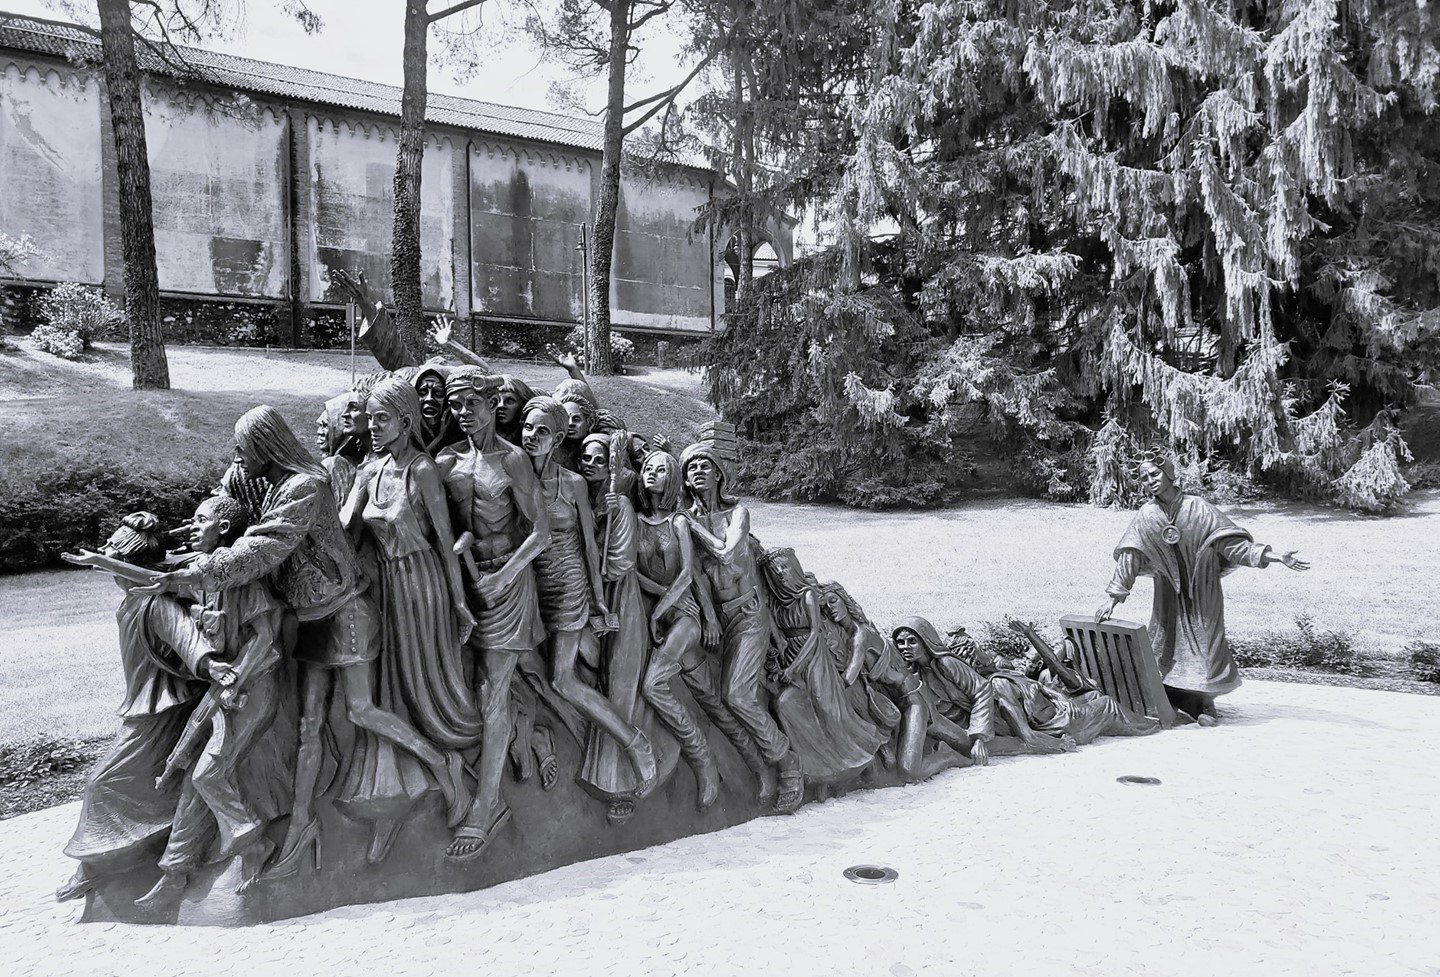 sculpture of people being released from captivity